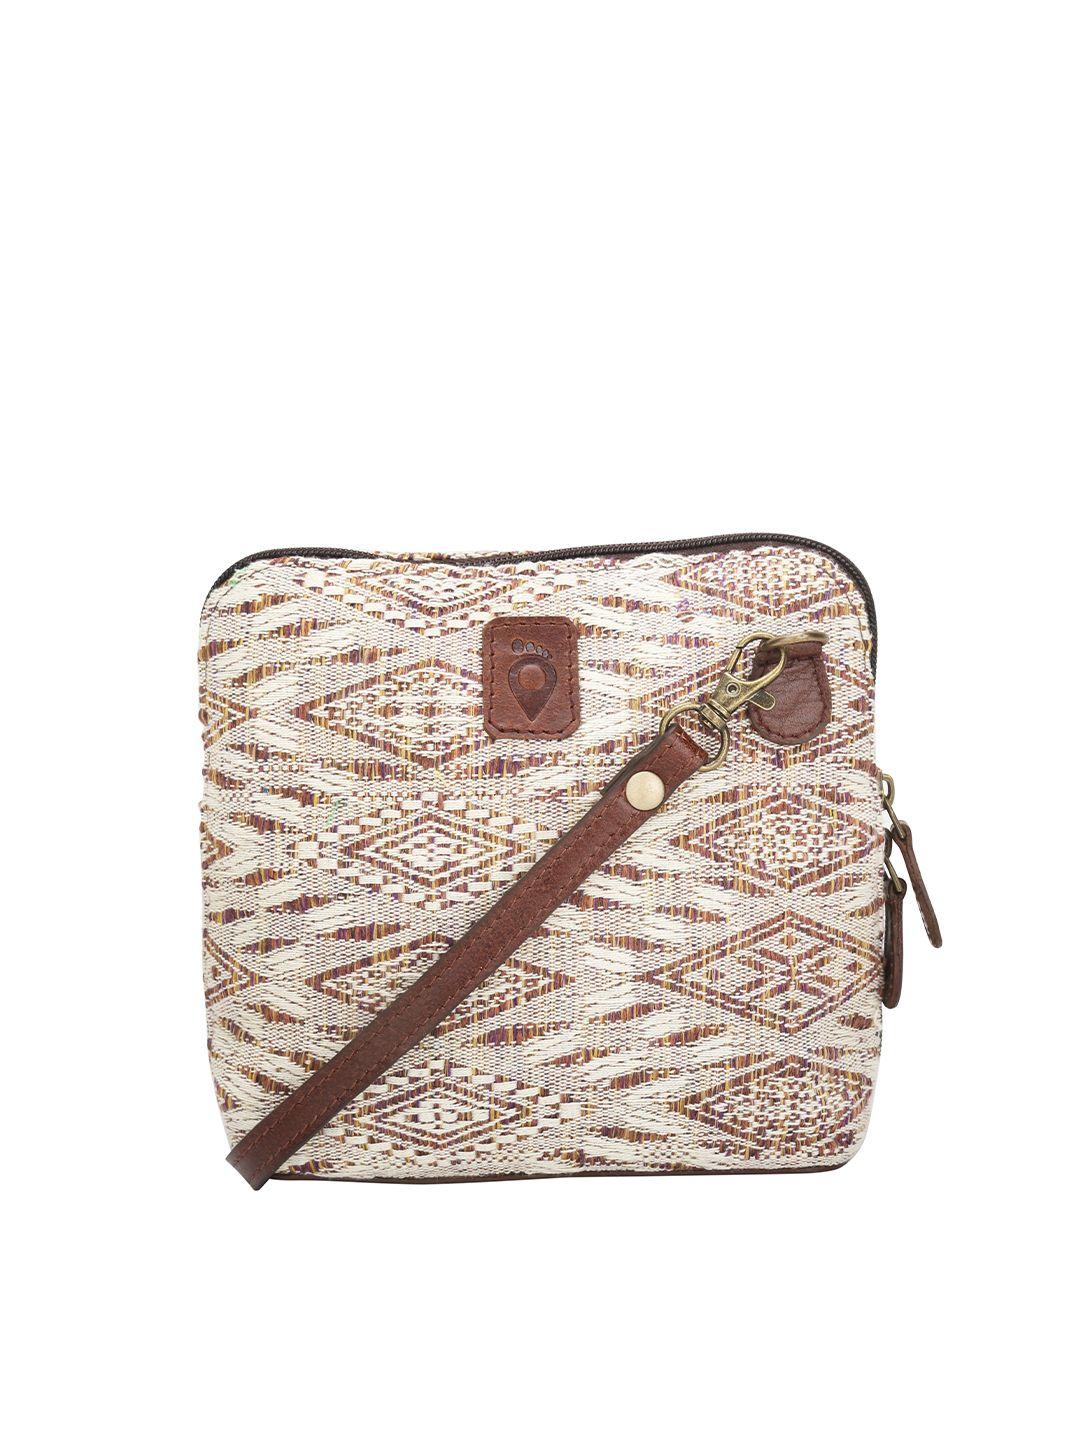 travalate cream-coloured leather structured sling bag